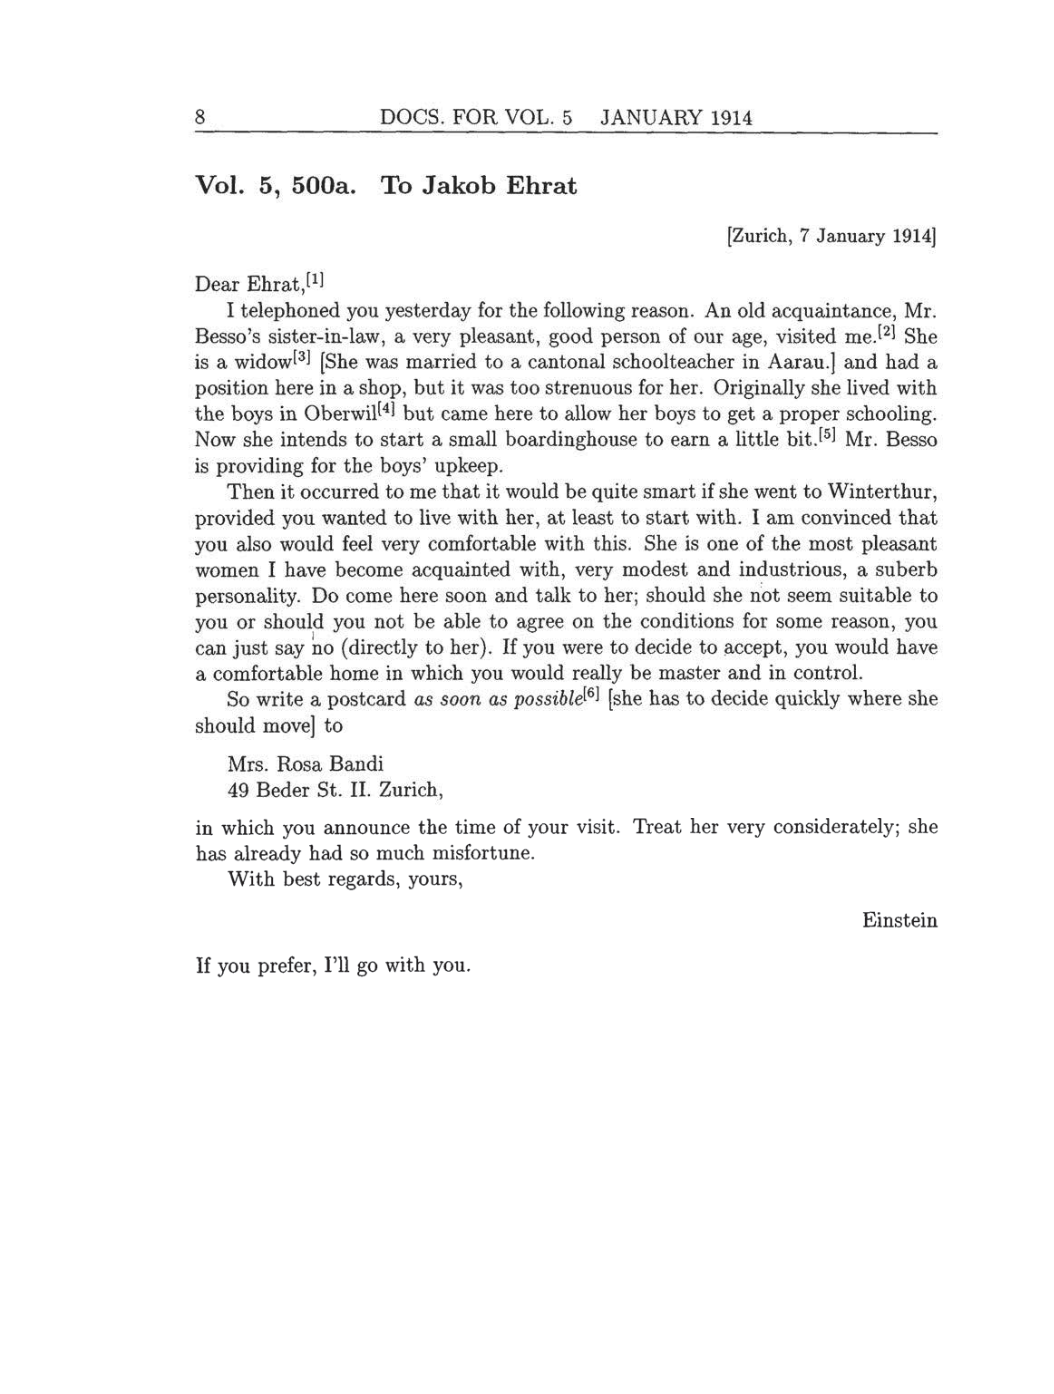 Volume 8: The Berlin Years: Correspondence, 1914-1918 (English translation supplement) page 8